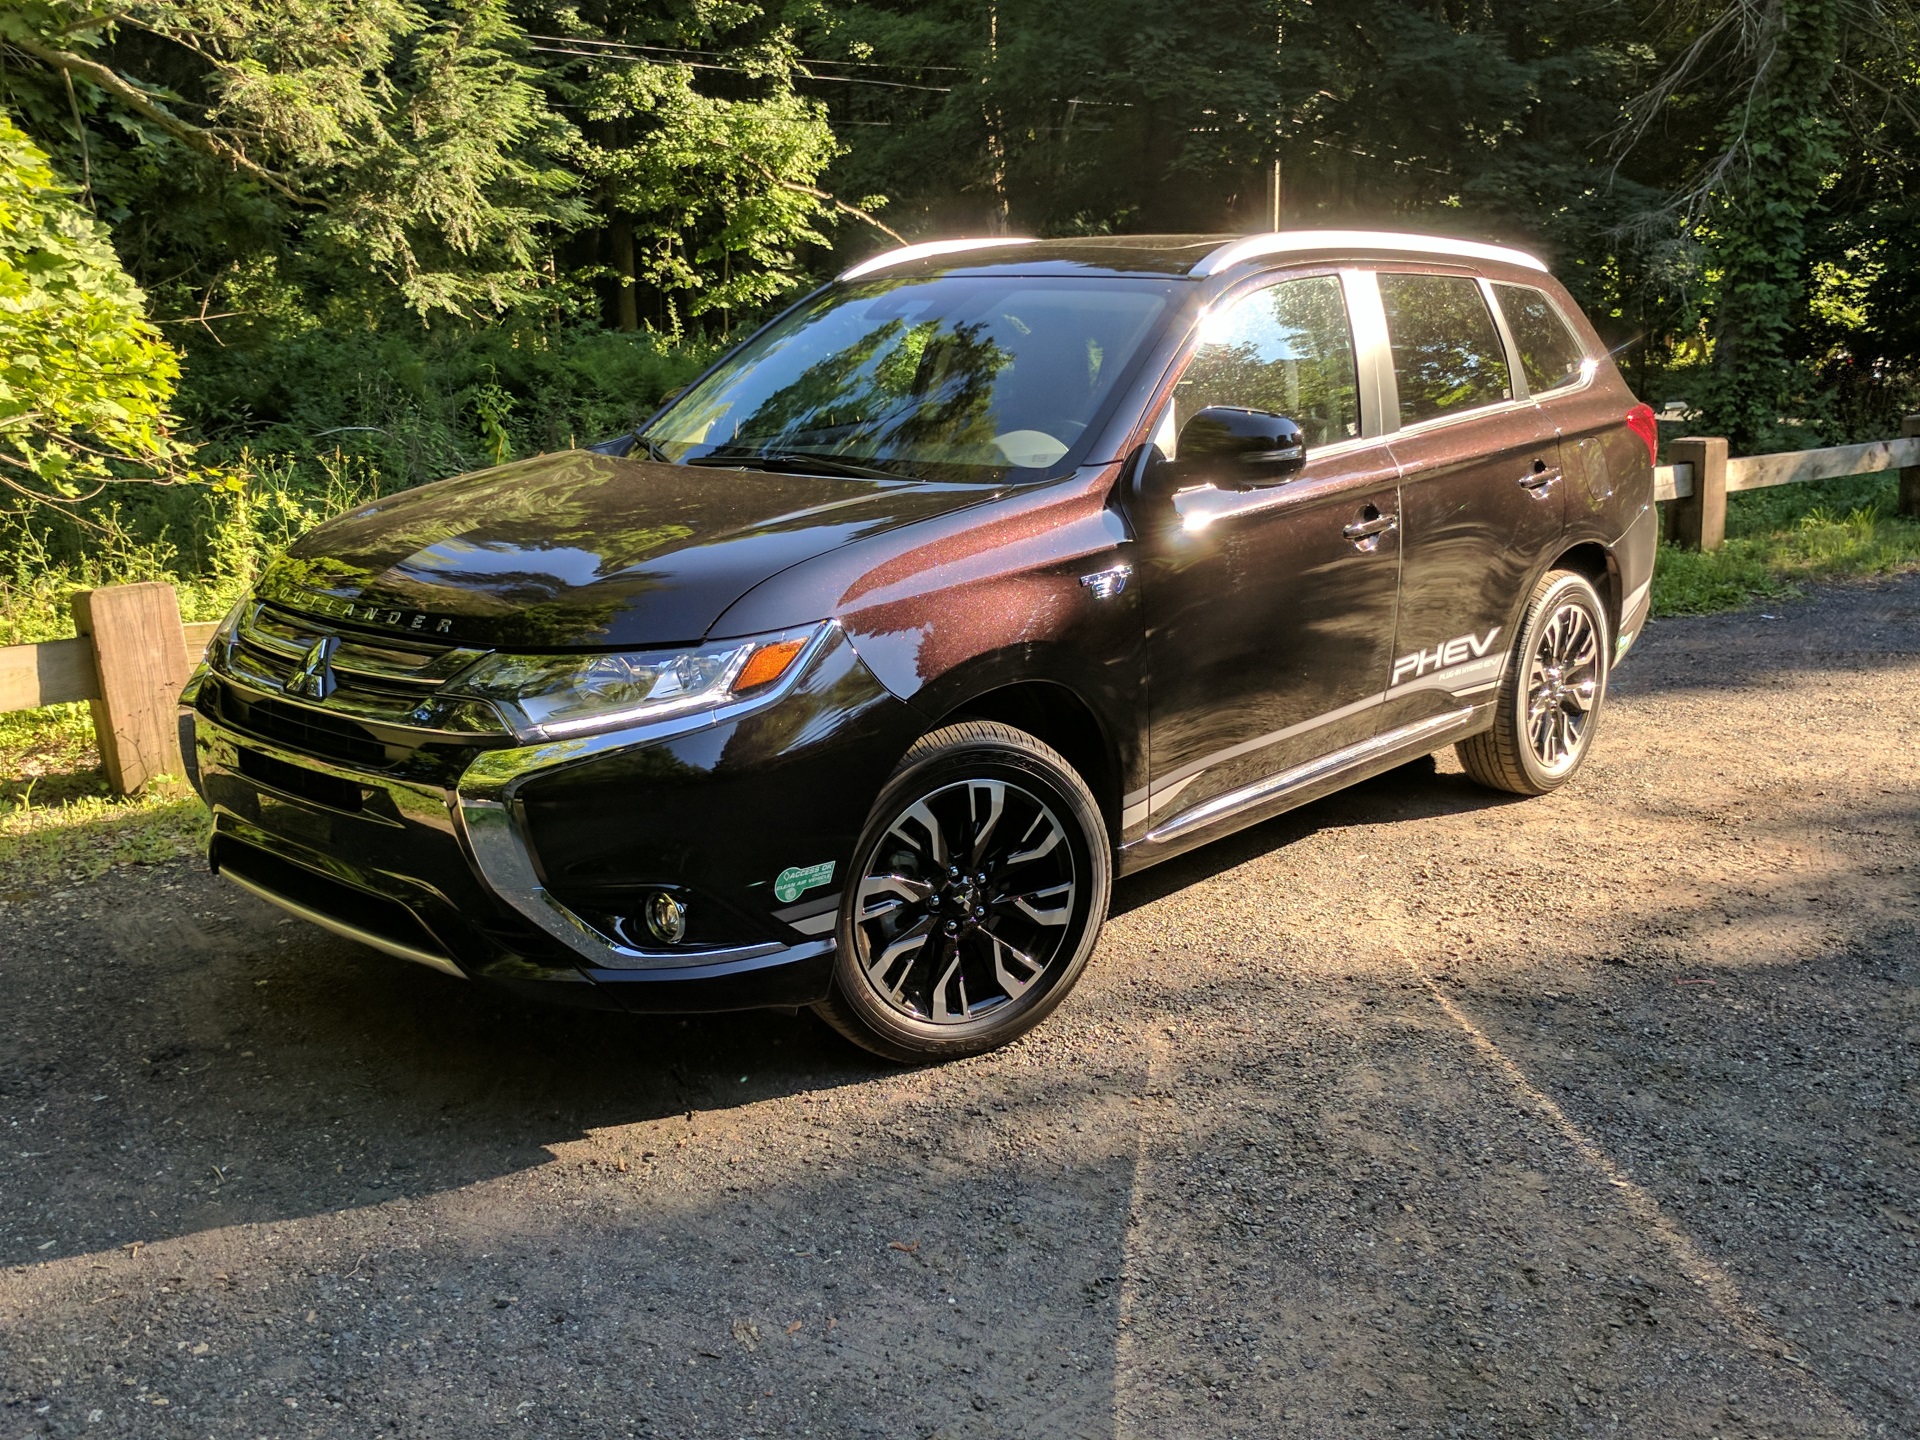 2018 Mitsubishi Outlander PHEV gas mileage review: practical and efficient